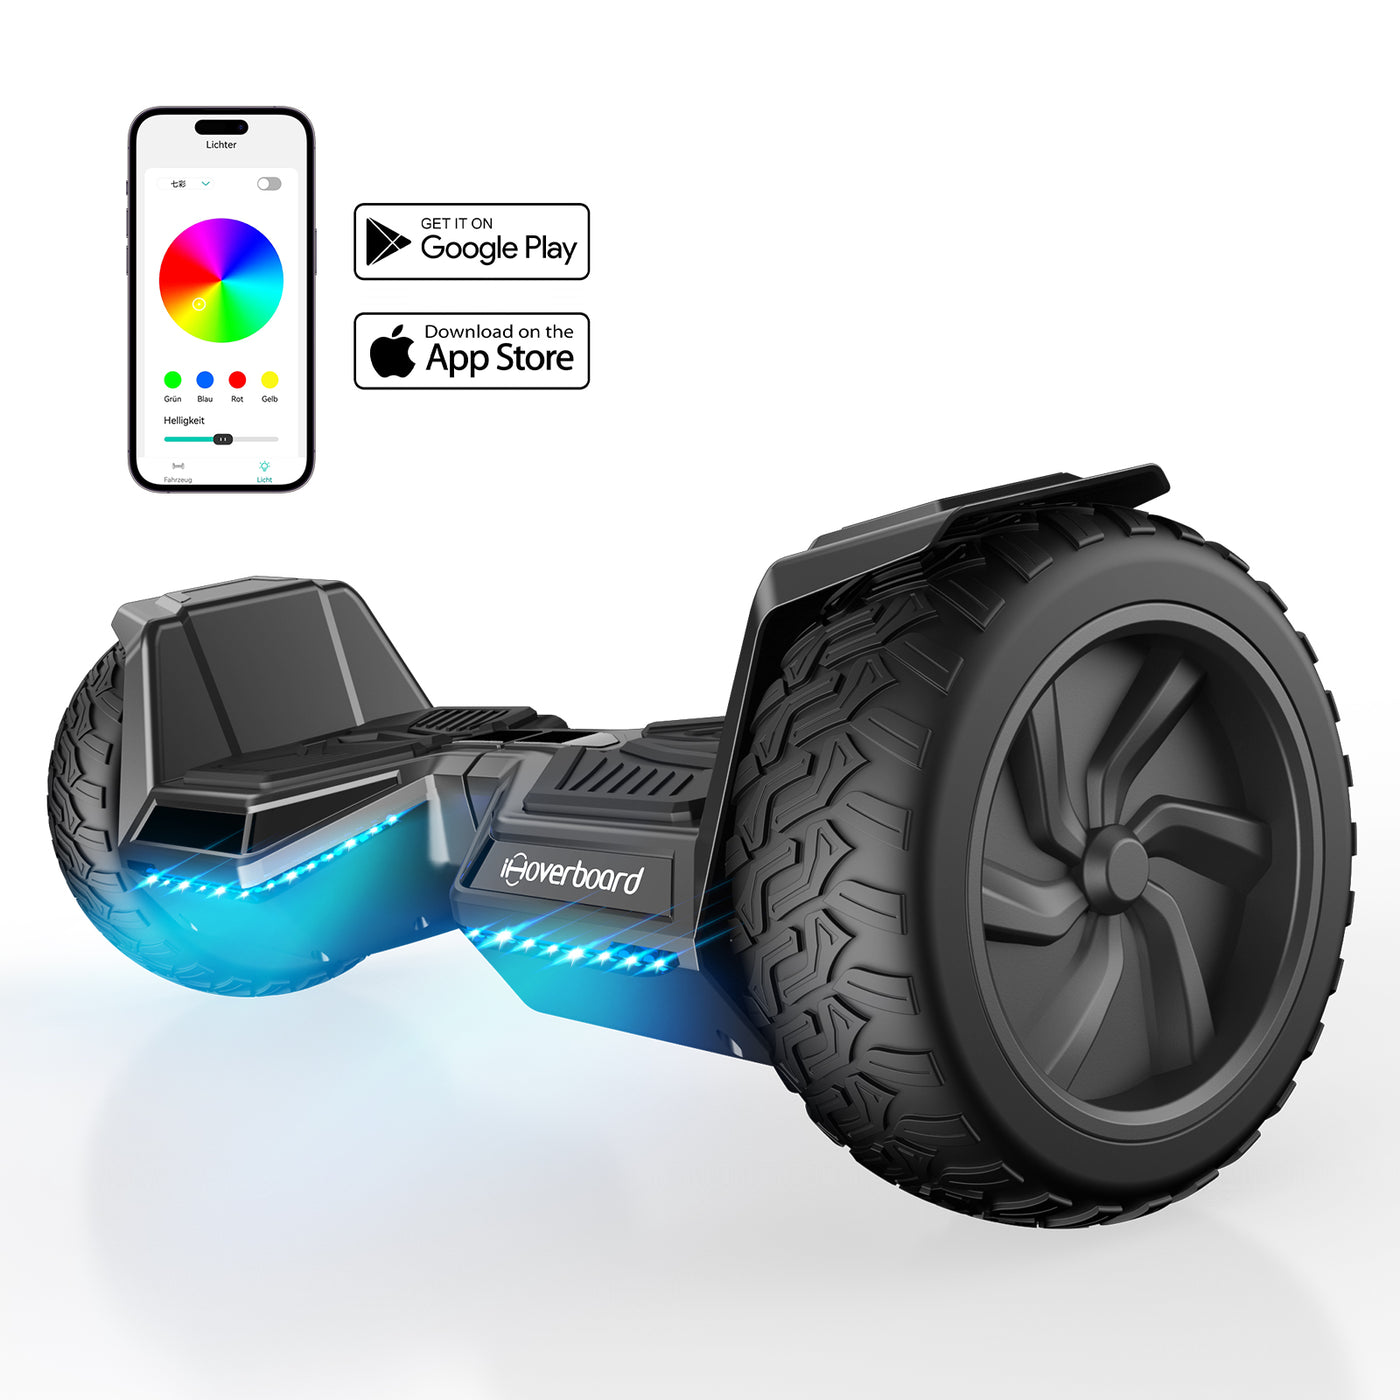 H8 Silber Bluetooth Hoverboard mit app